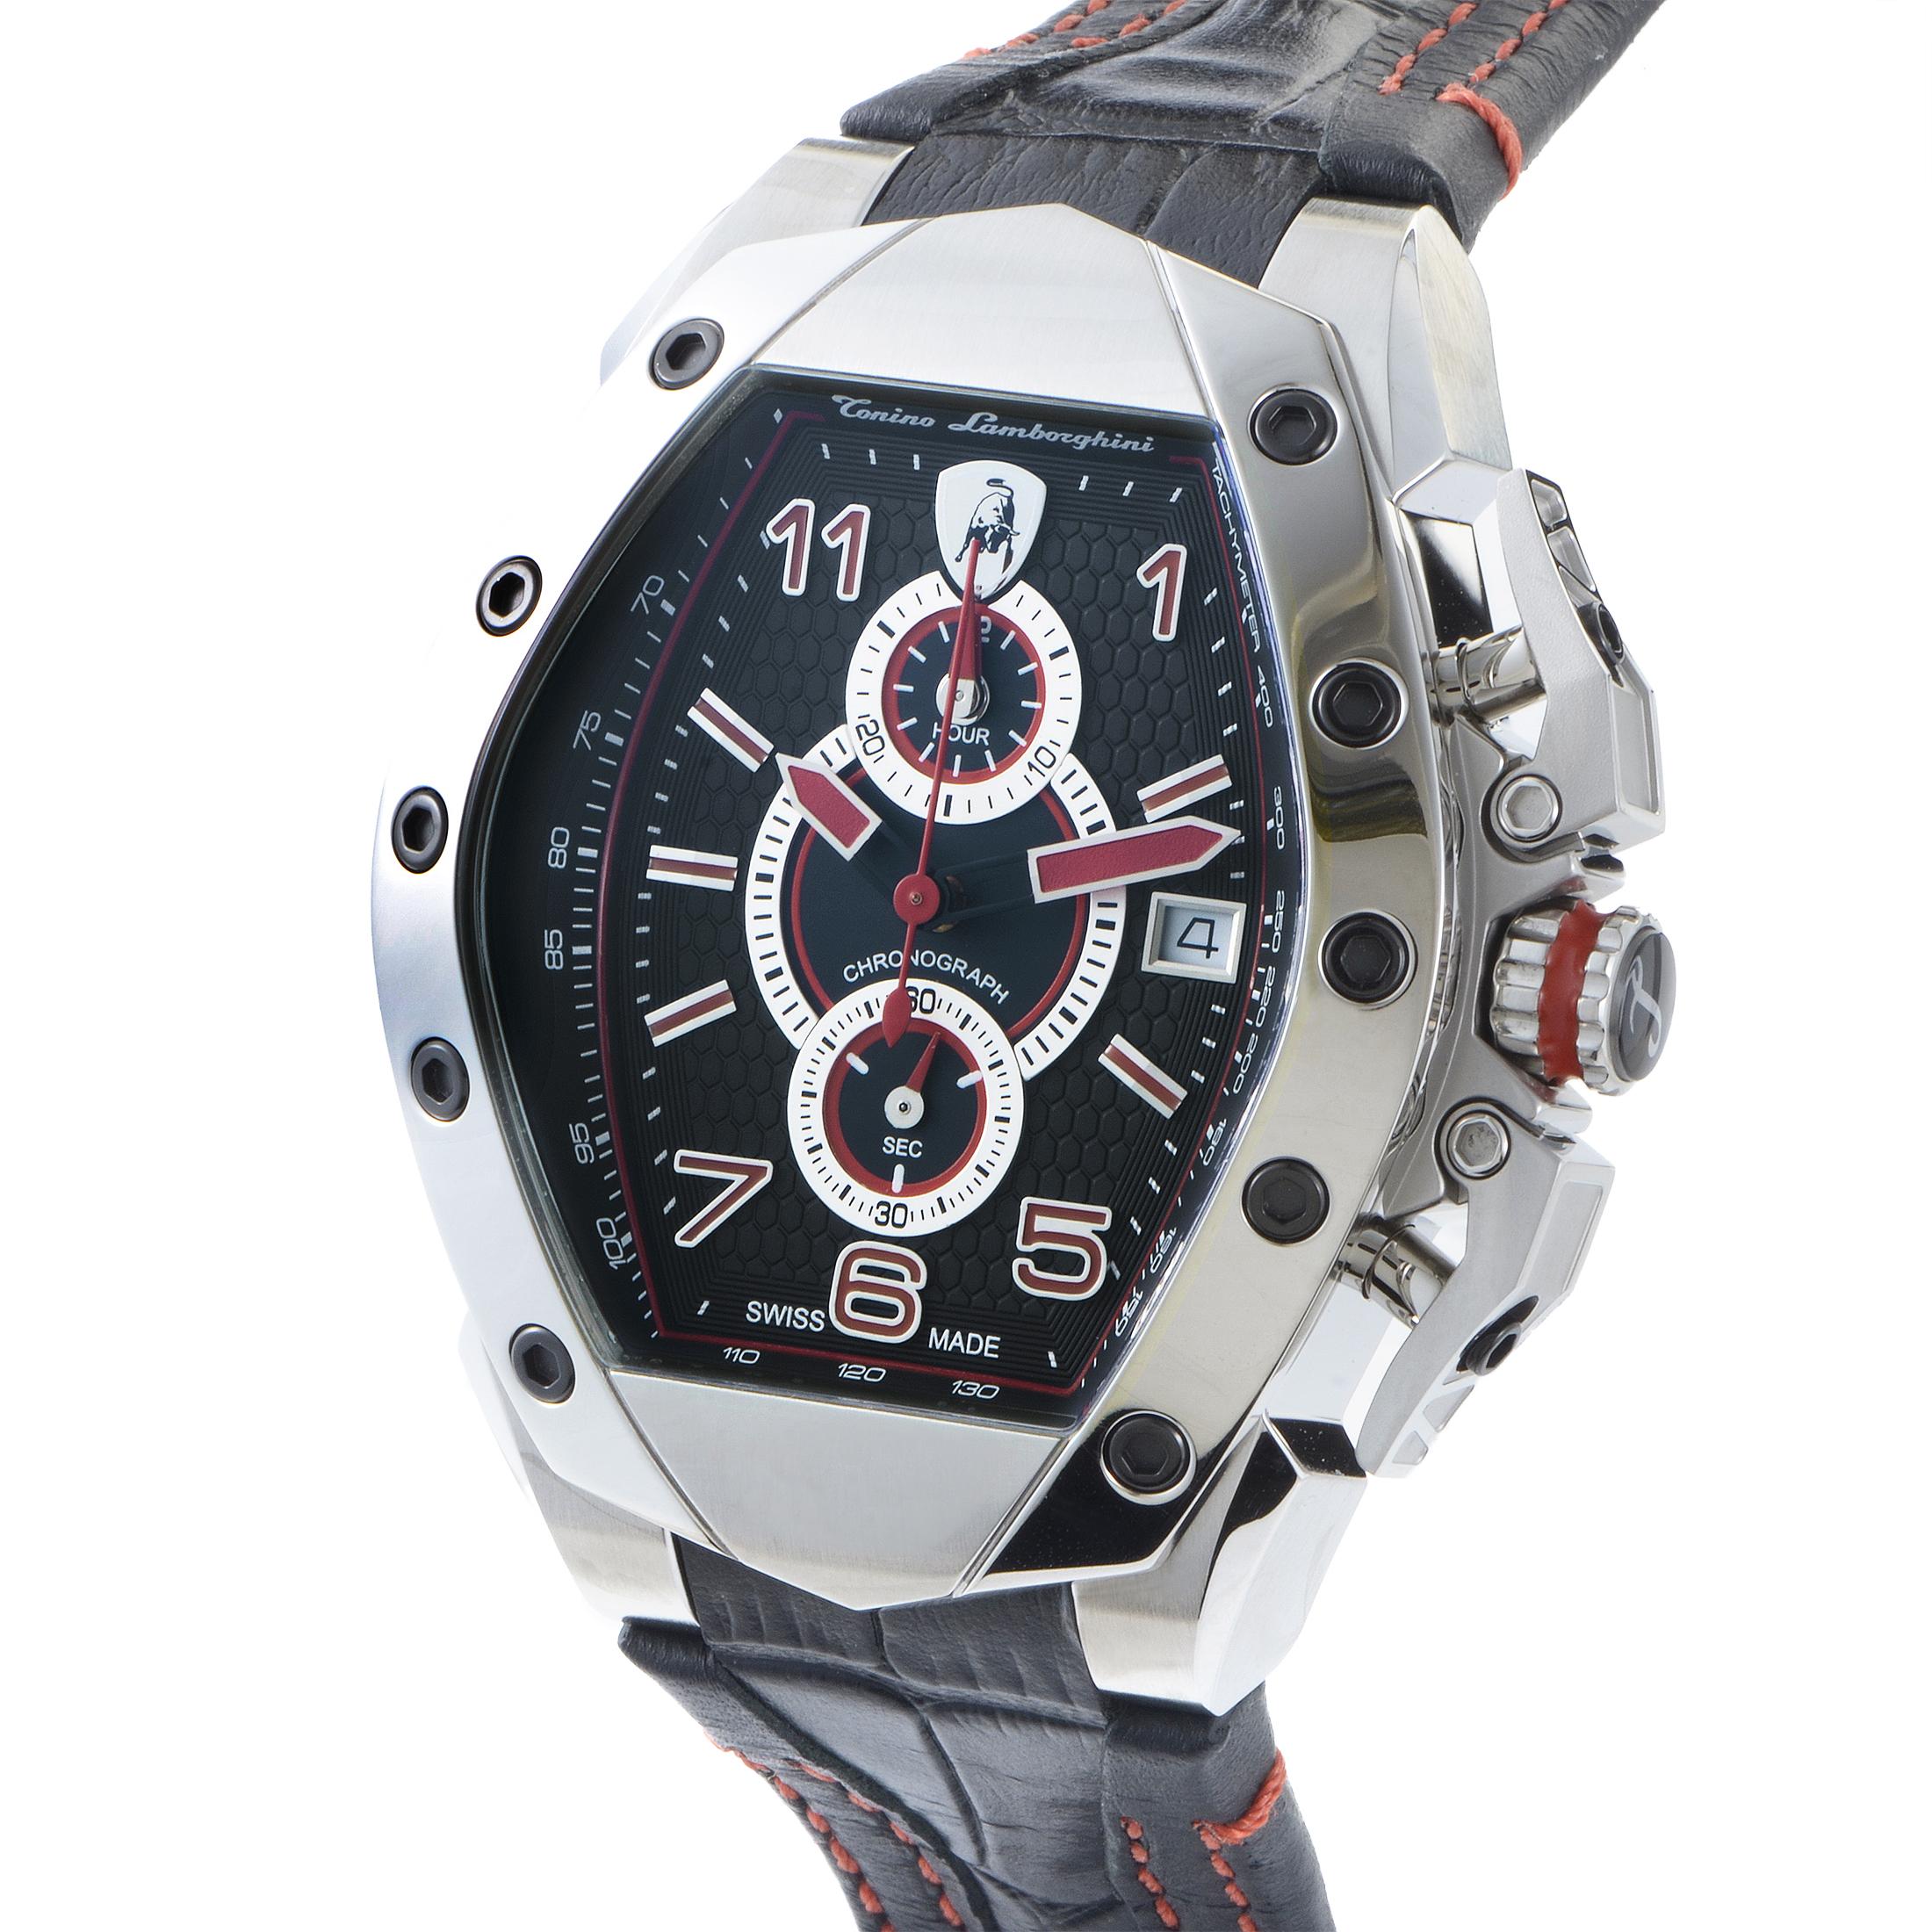 The ideal symmetry of a dial design where three chapter rings and the brand's famous logo are neatly lined along the vertical axis adds a compelling aesthetic dimension to this masculine timepiece from Tonino Lamborghini which offers great